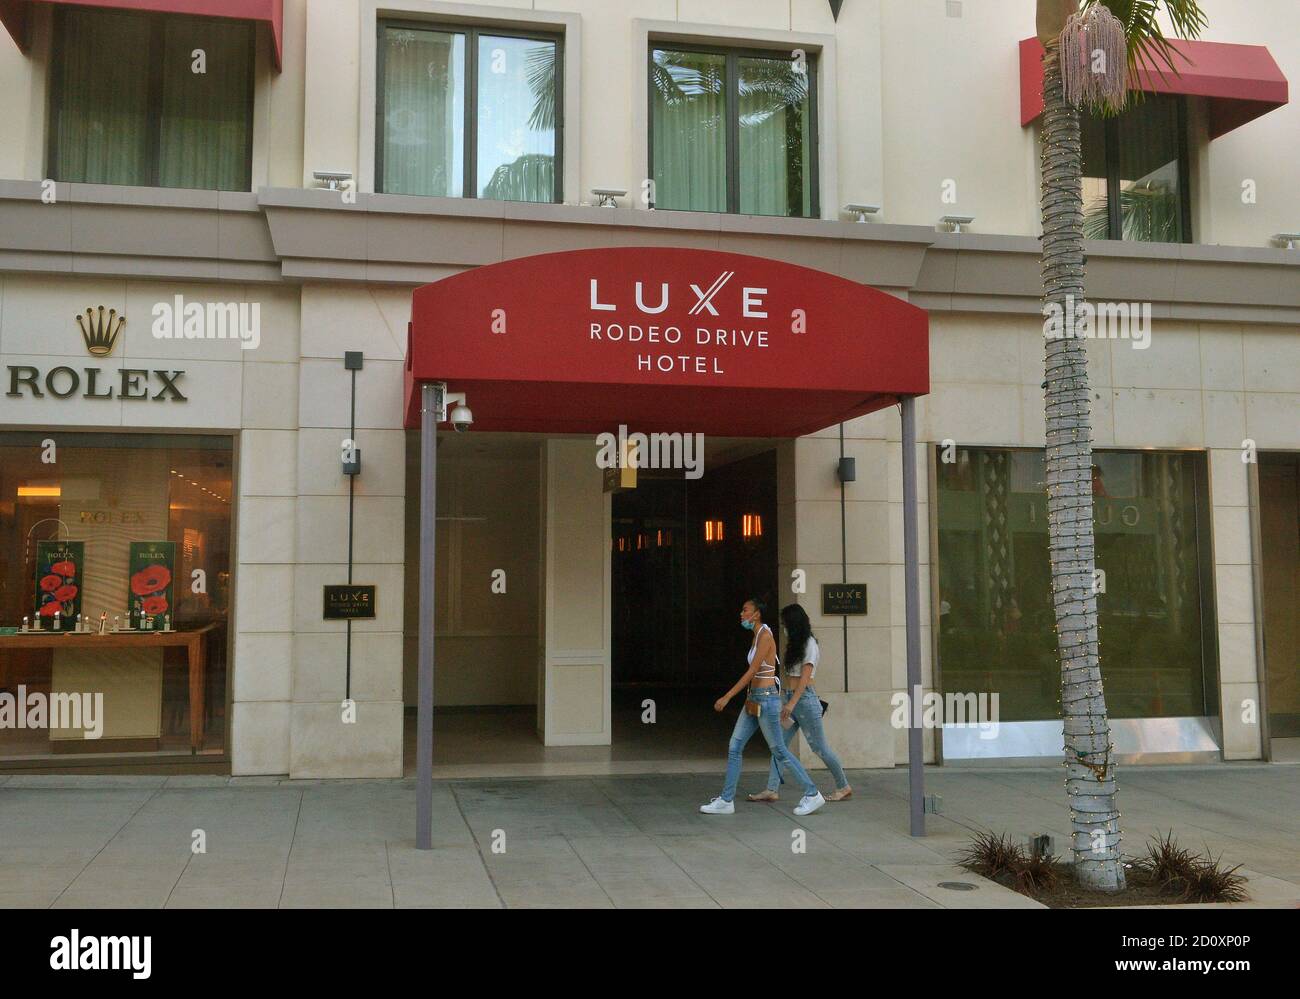 Beverly Hills, United States. 03rd Oct, 2020. The Luxe Rodeo Drive hotel in Beverly Hills is pictured on Friday, October 2, 2020. The hotel has shut down, citing the financial effects of the COVID-19 crisis., as the steep decline in tourism and business travel has devastated the hotel industry. The Luxe Rodeo Drive hotel is the Los Angeles area's first high-end hotel to go out of business because of the pandemic. Photo by Jim Ruymen/UPI Credit: UPI/Alamy Live News Stock Photo